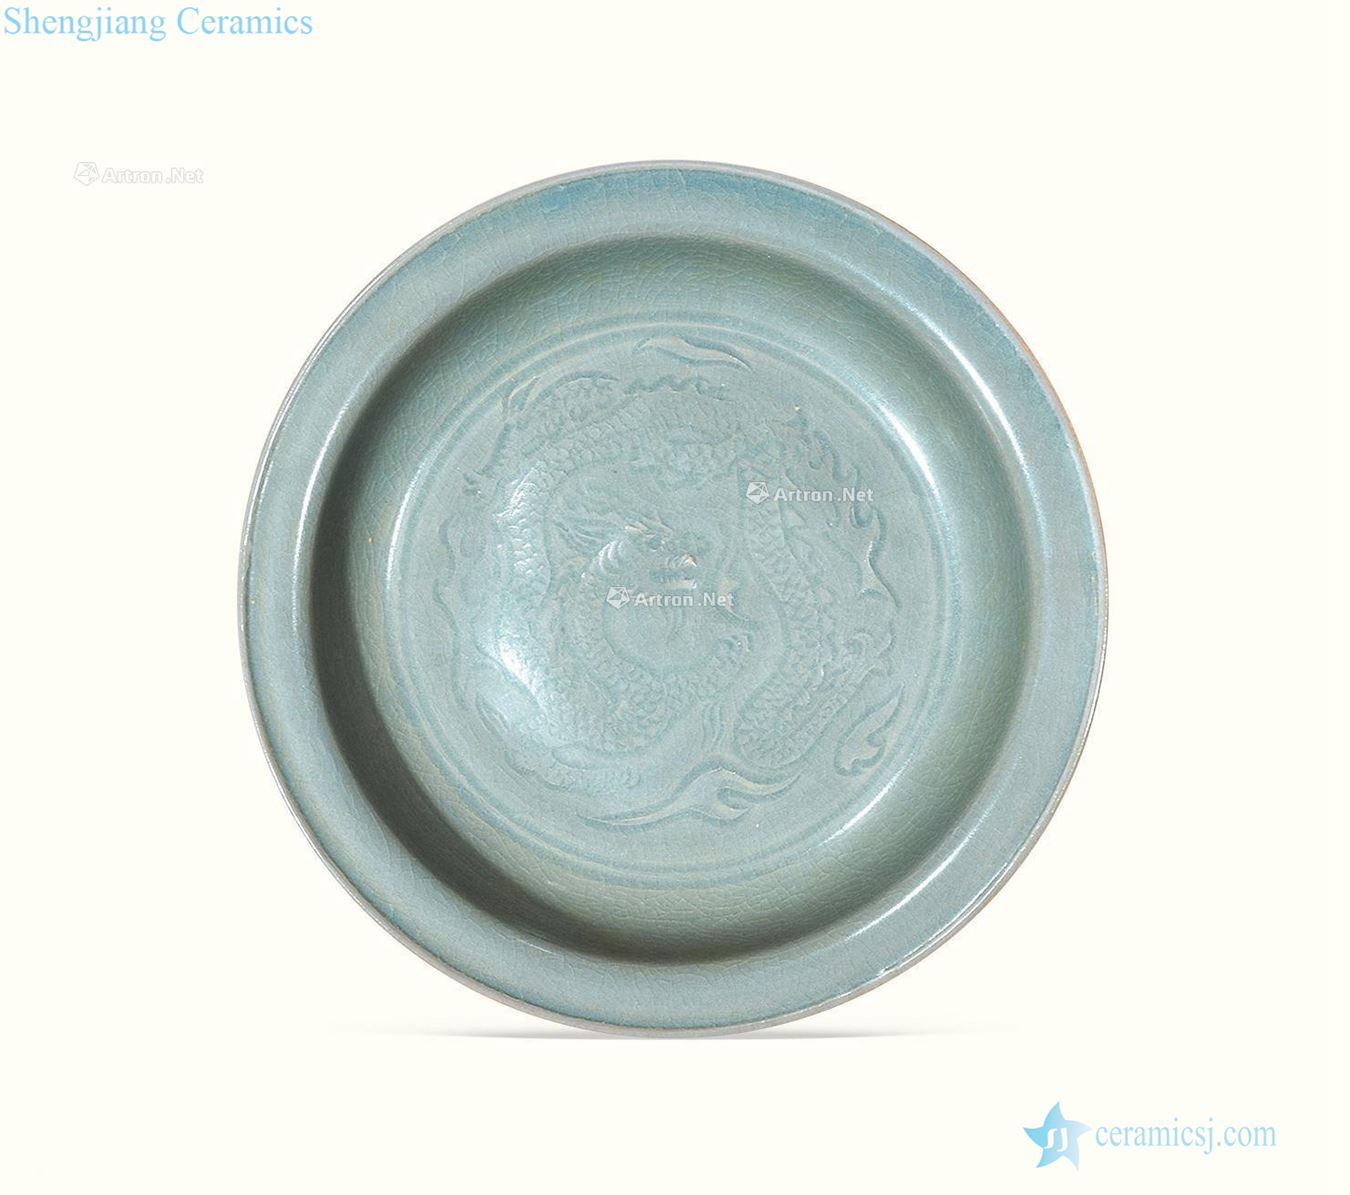 The song dynasty Your kiln green glaze dark carved dragon pattern plate